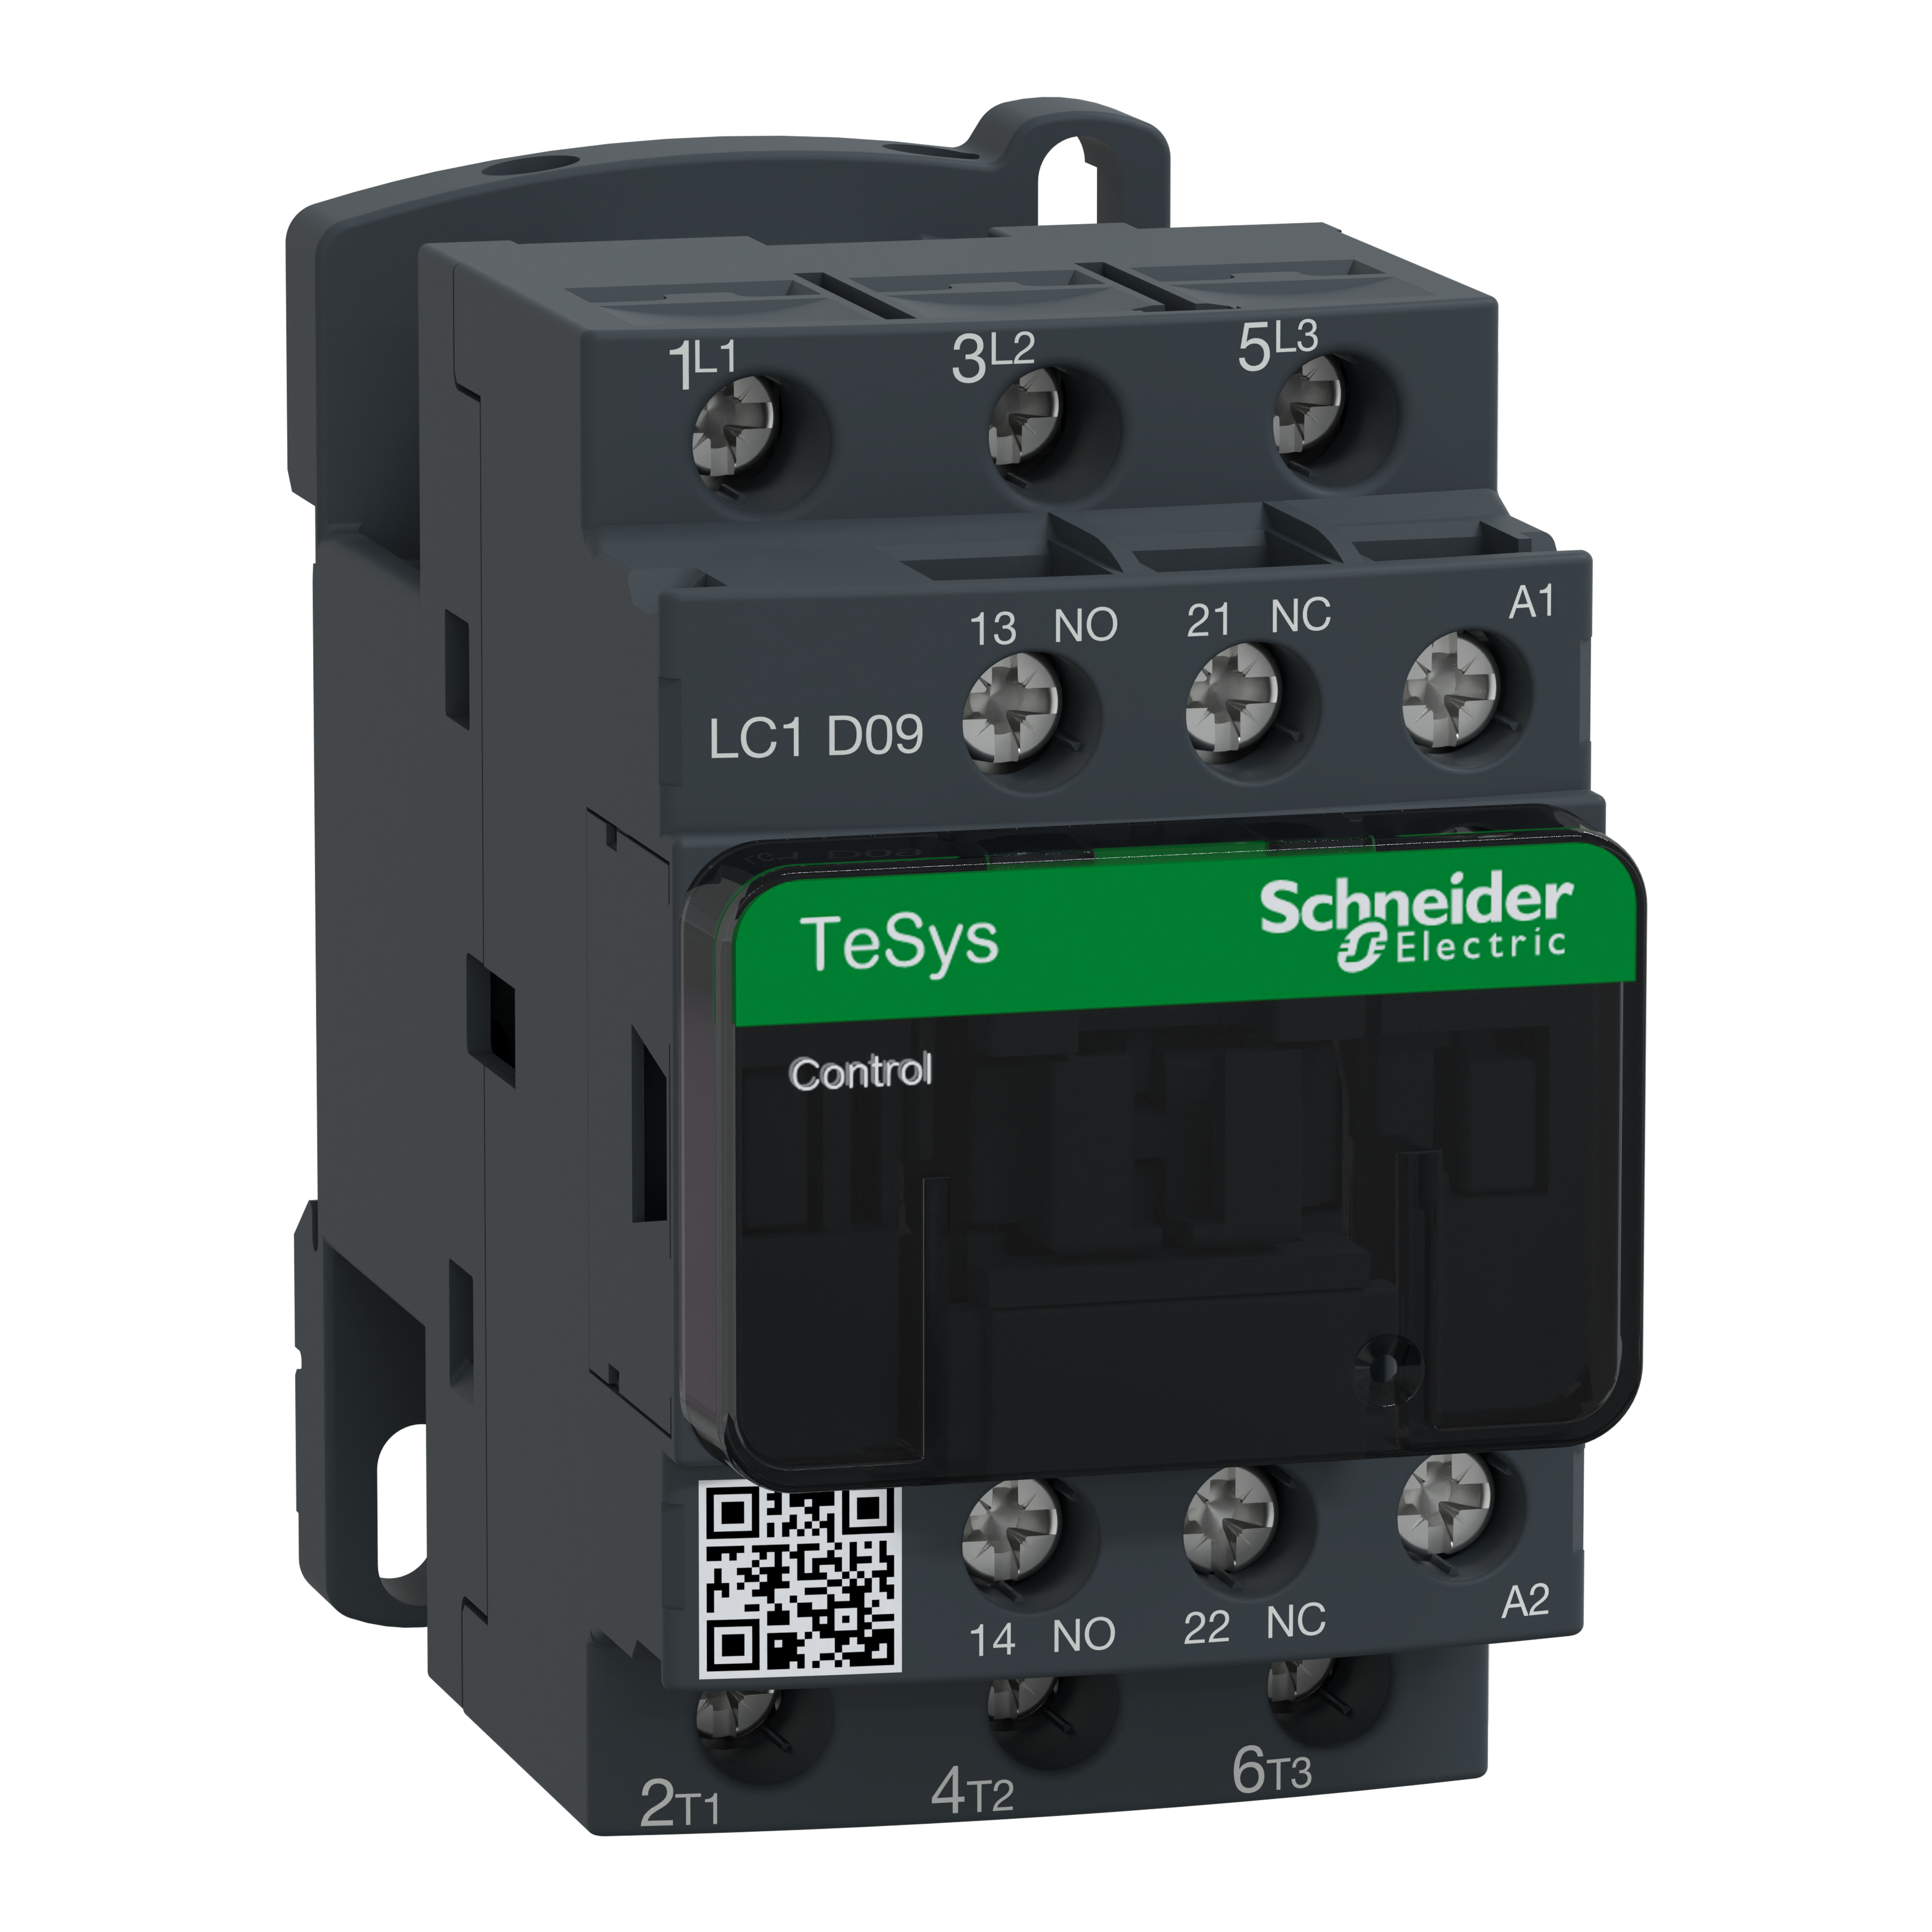 IEC contactor, TeSys Deca, nonreversing, 9A, 5HP at 480VAC, up to 100kA SCCR, 3 phase, 3 NO, 220VAC 50/60Hz coil, open style